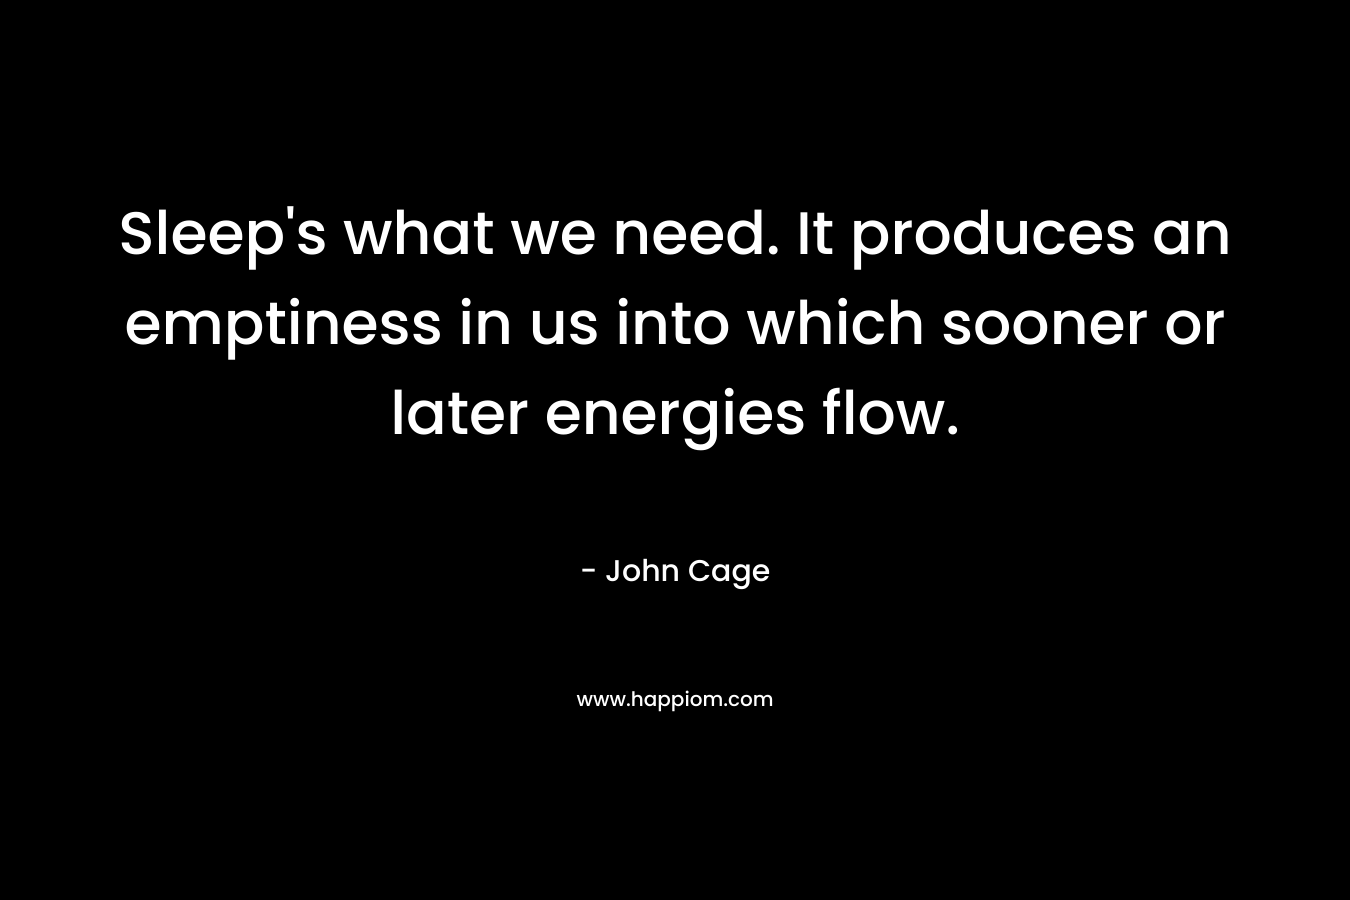 Sleep’s what we need. It produces an emptiness in us into which sooner or later energies flow. – John Cage